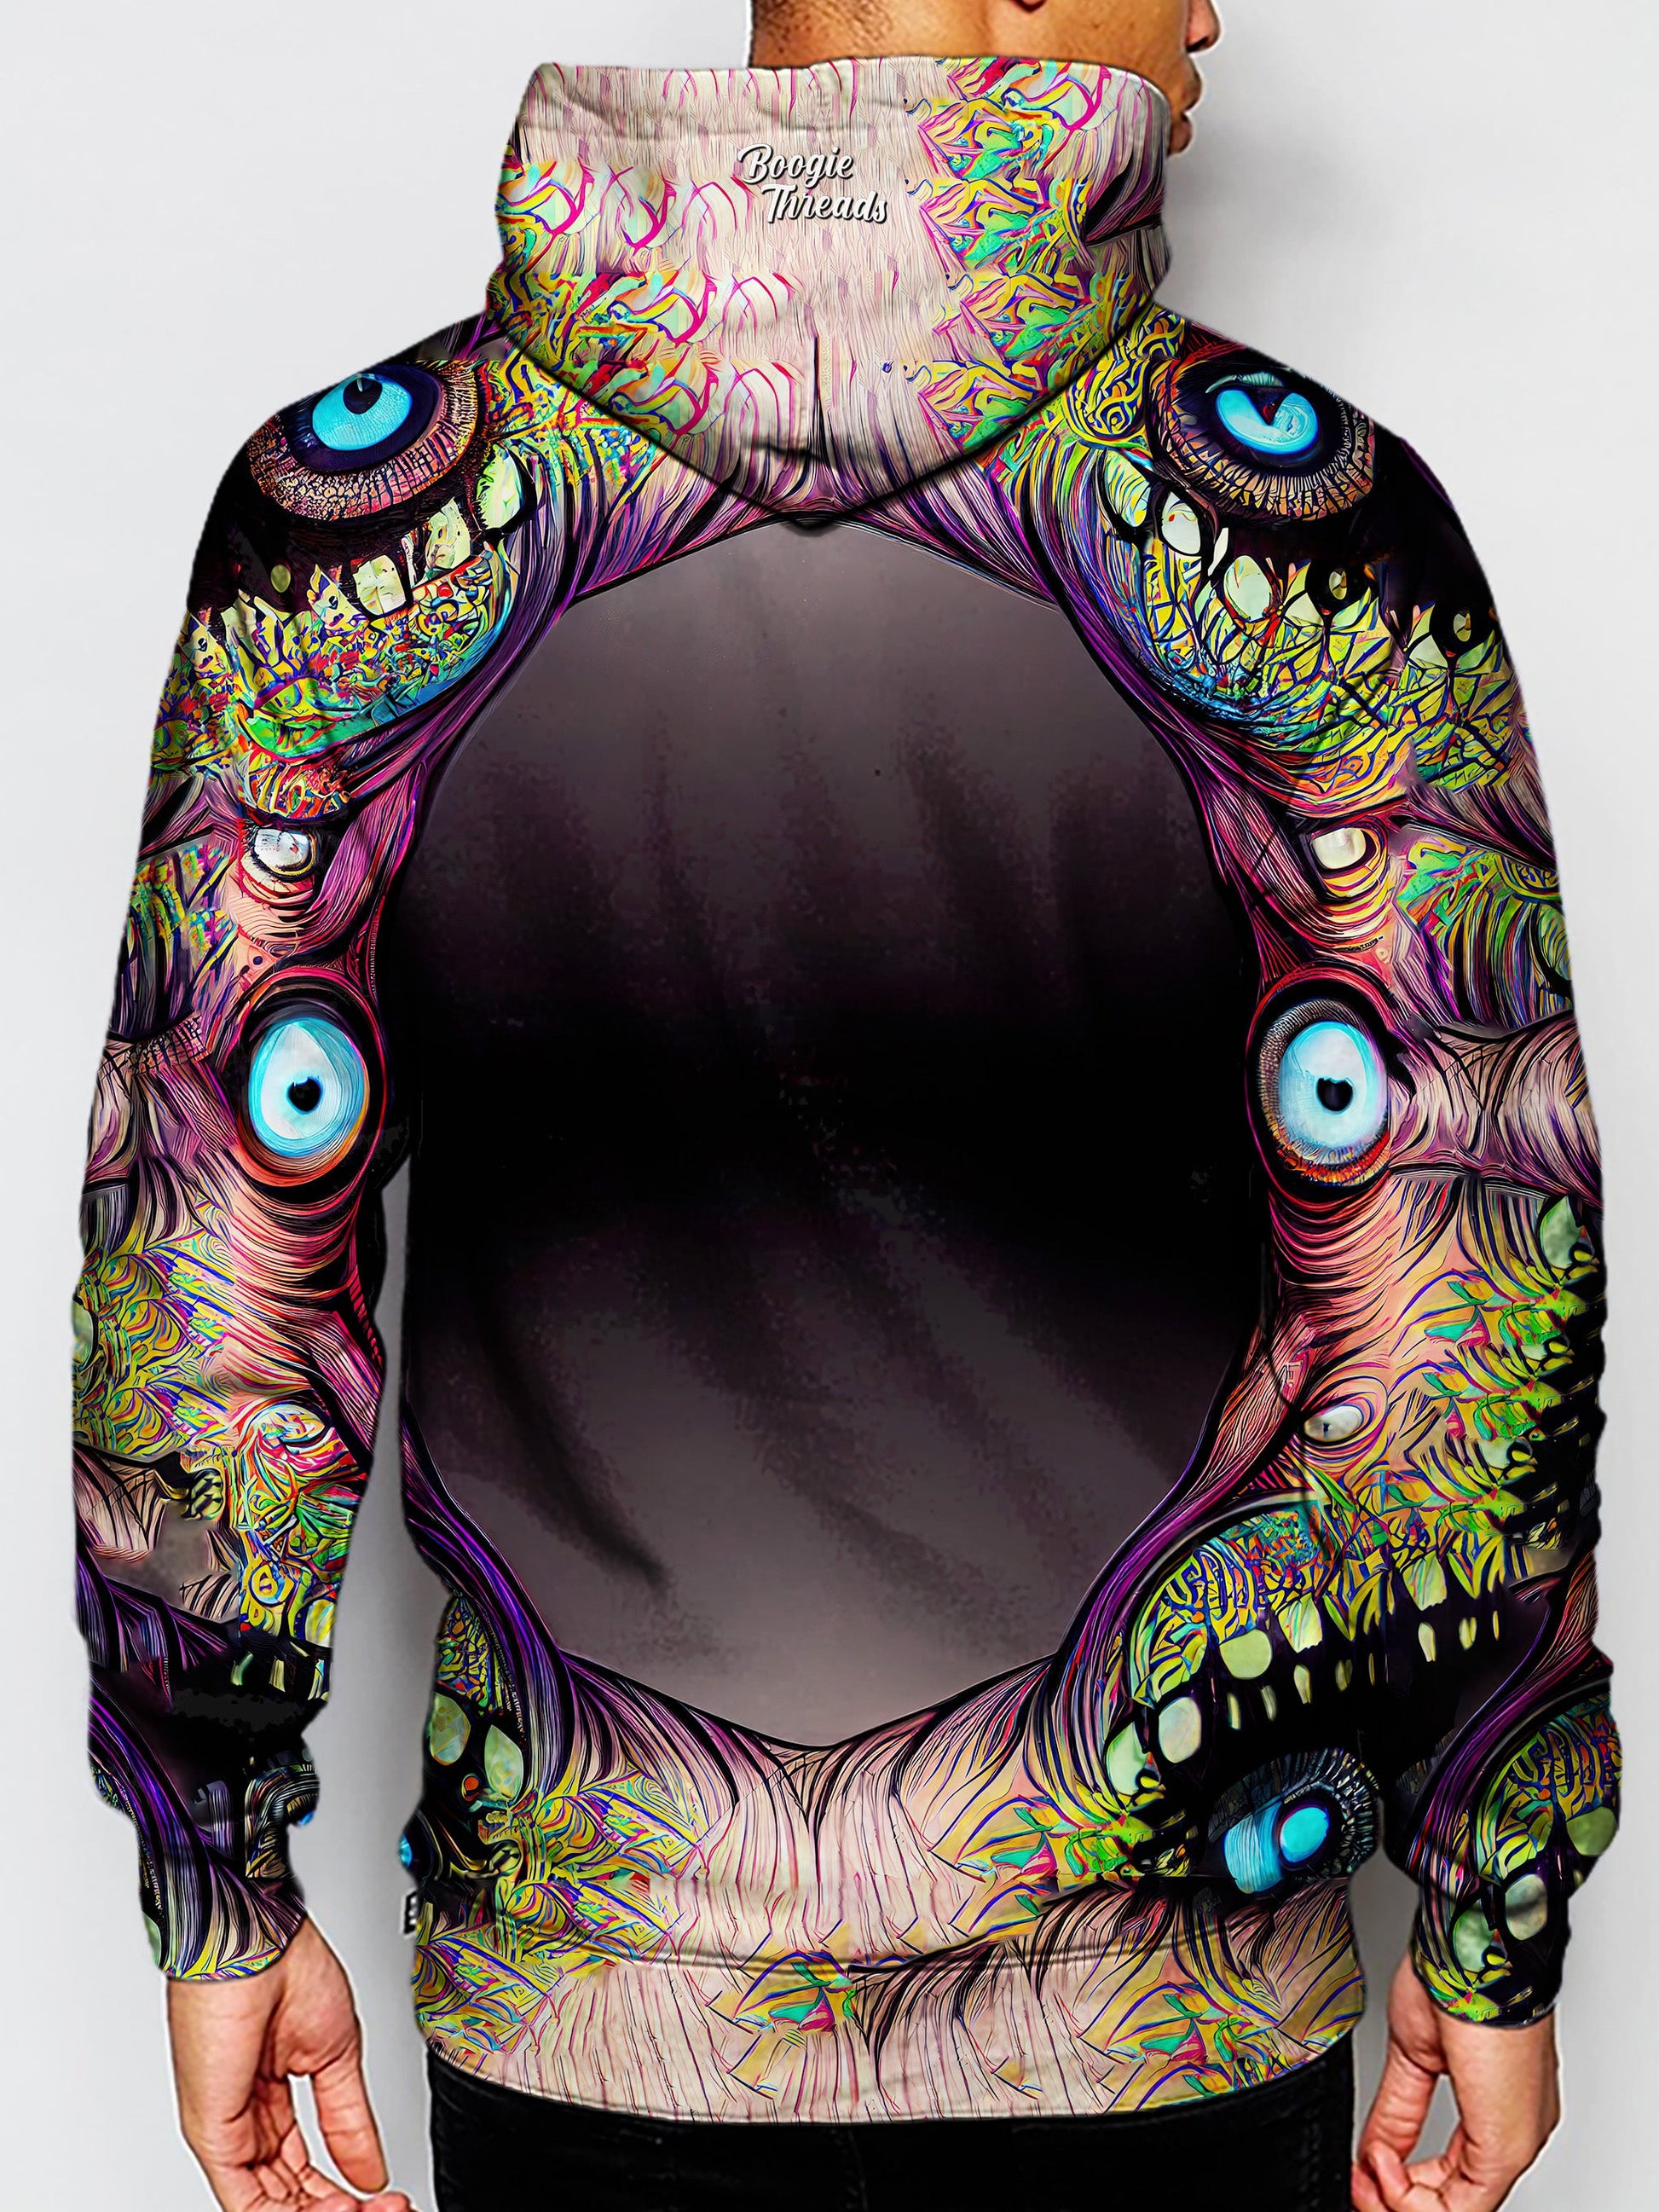 Stay comfortable and fashionable all night long at your next festival or rave with this cozy hoodie